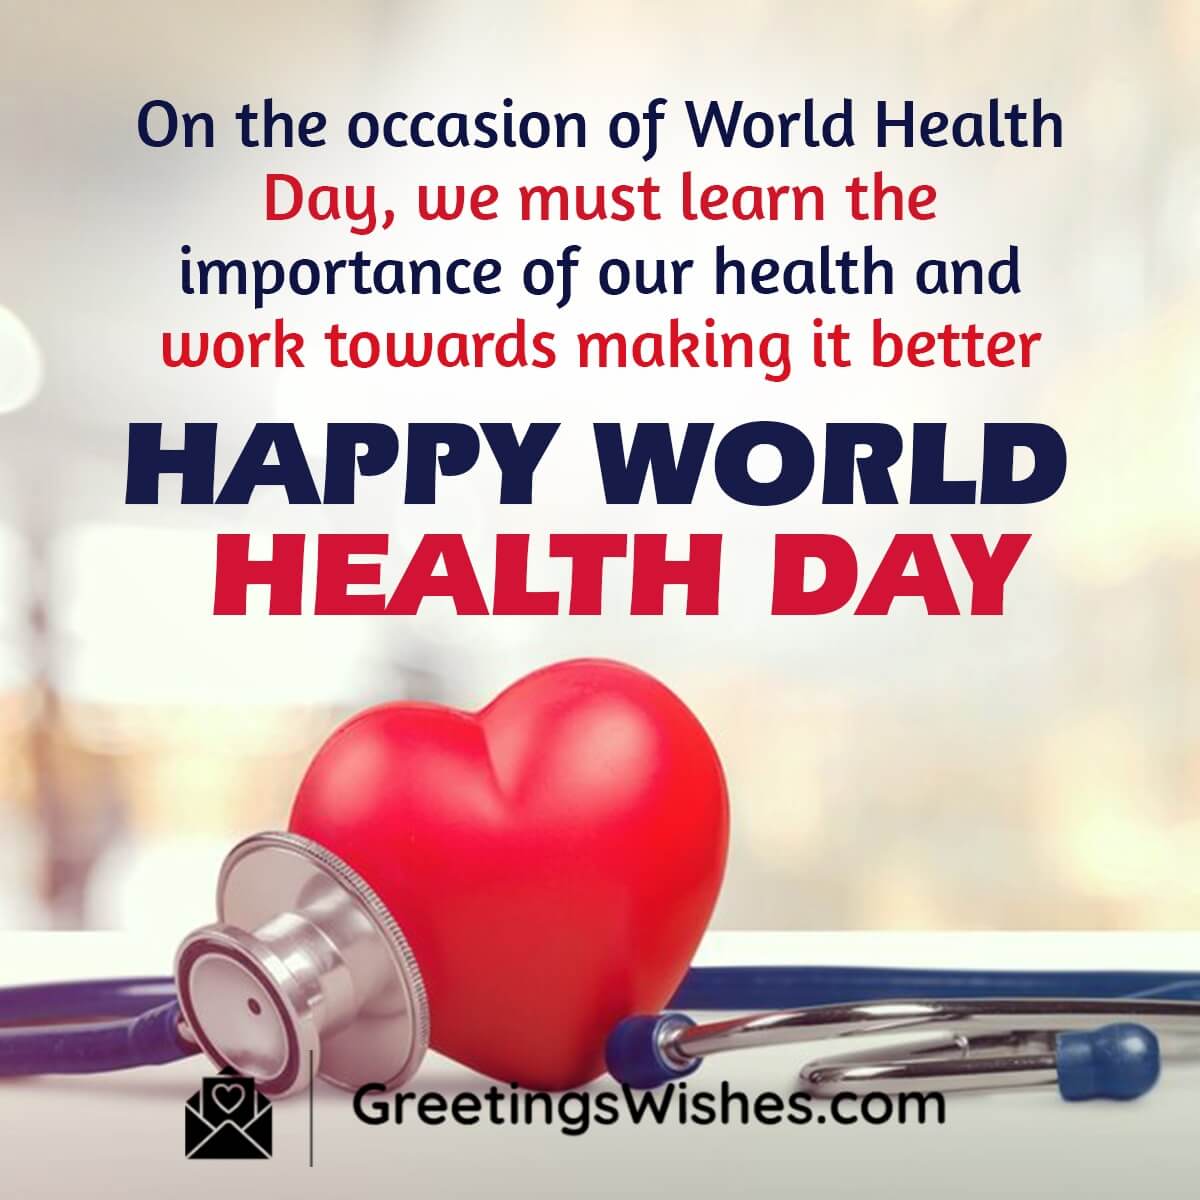 Happy World Health Day Messages